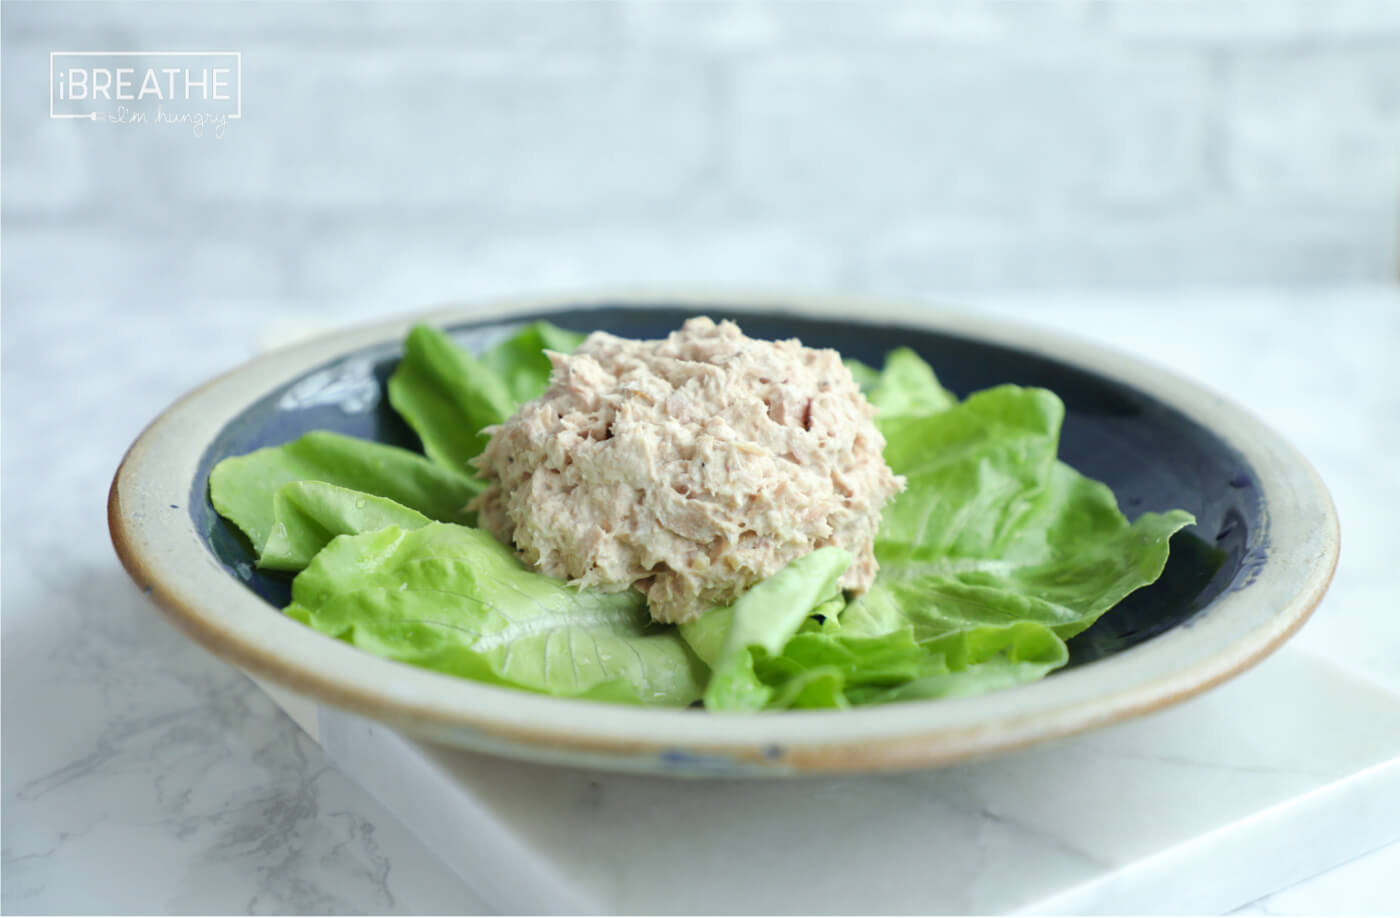 An easy keto tuna salad that takes 2 minutes to make and requires no chopping! Paleo, Whole 30, Low Carb